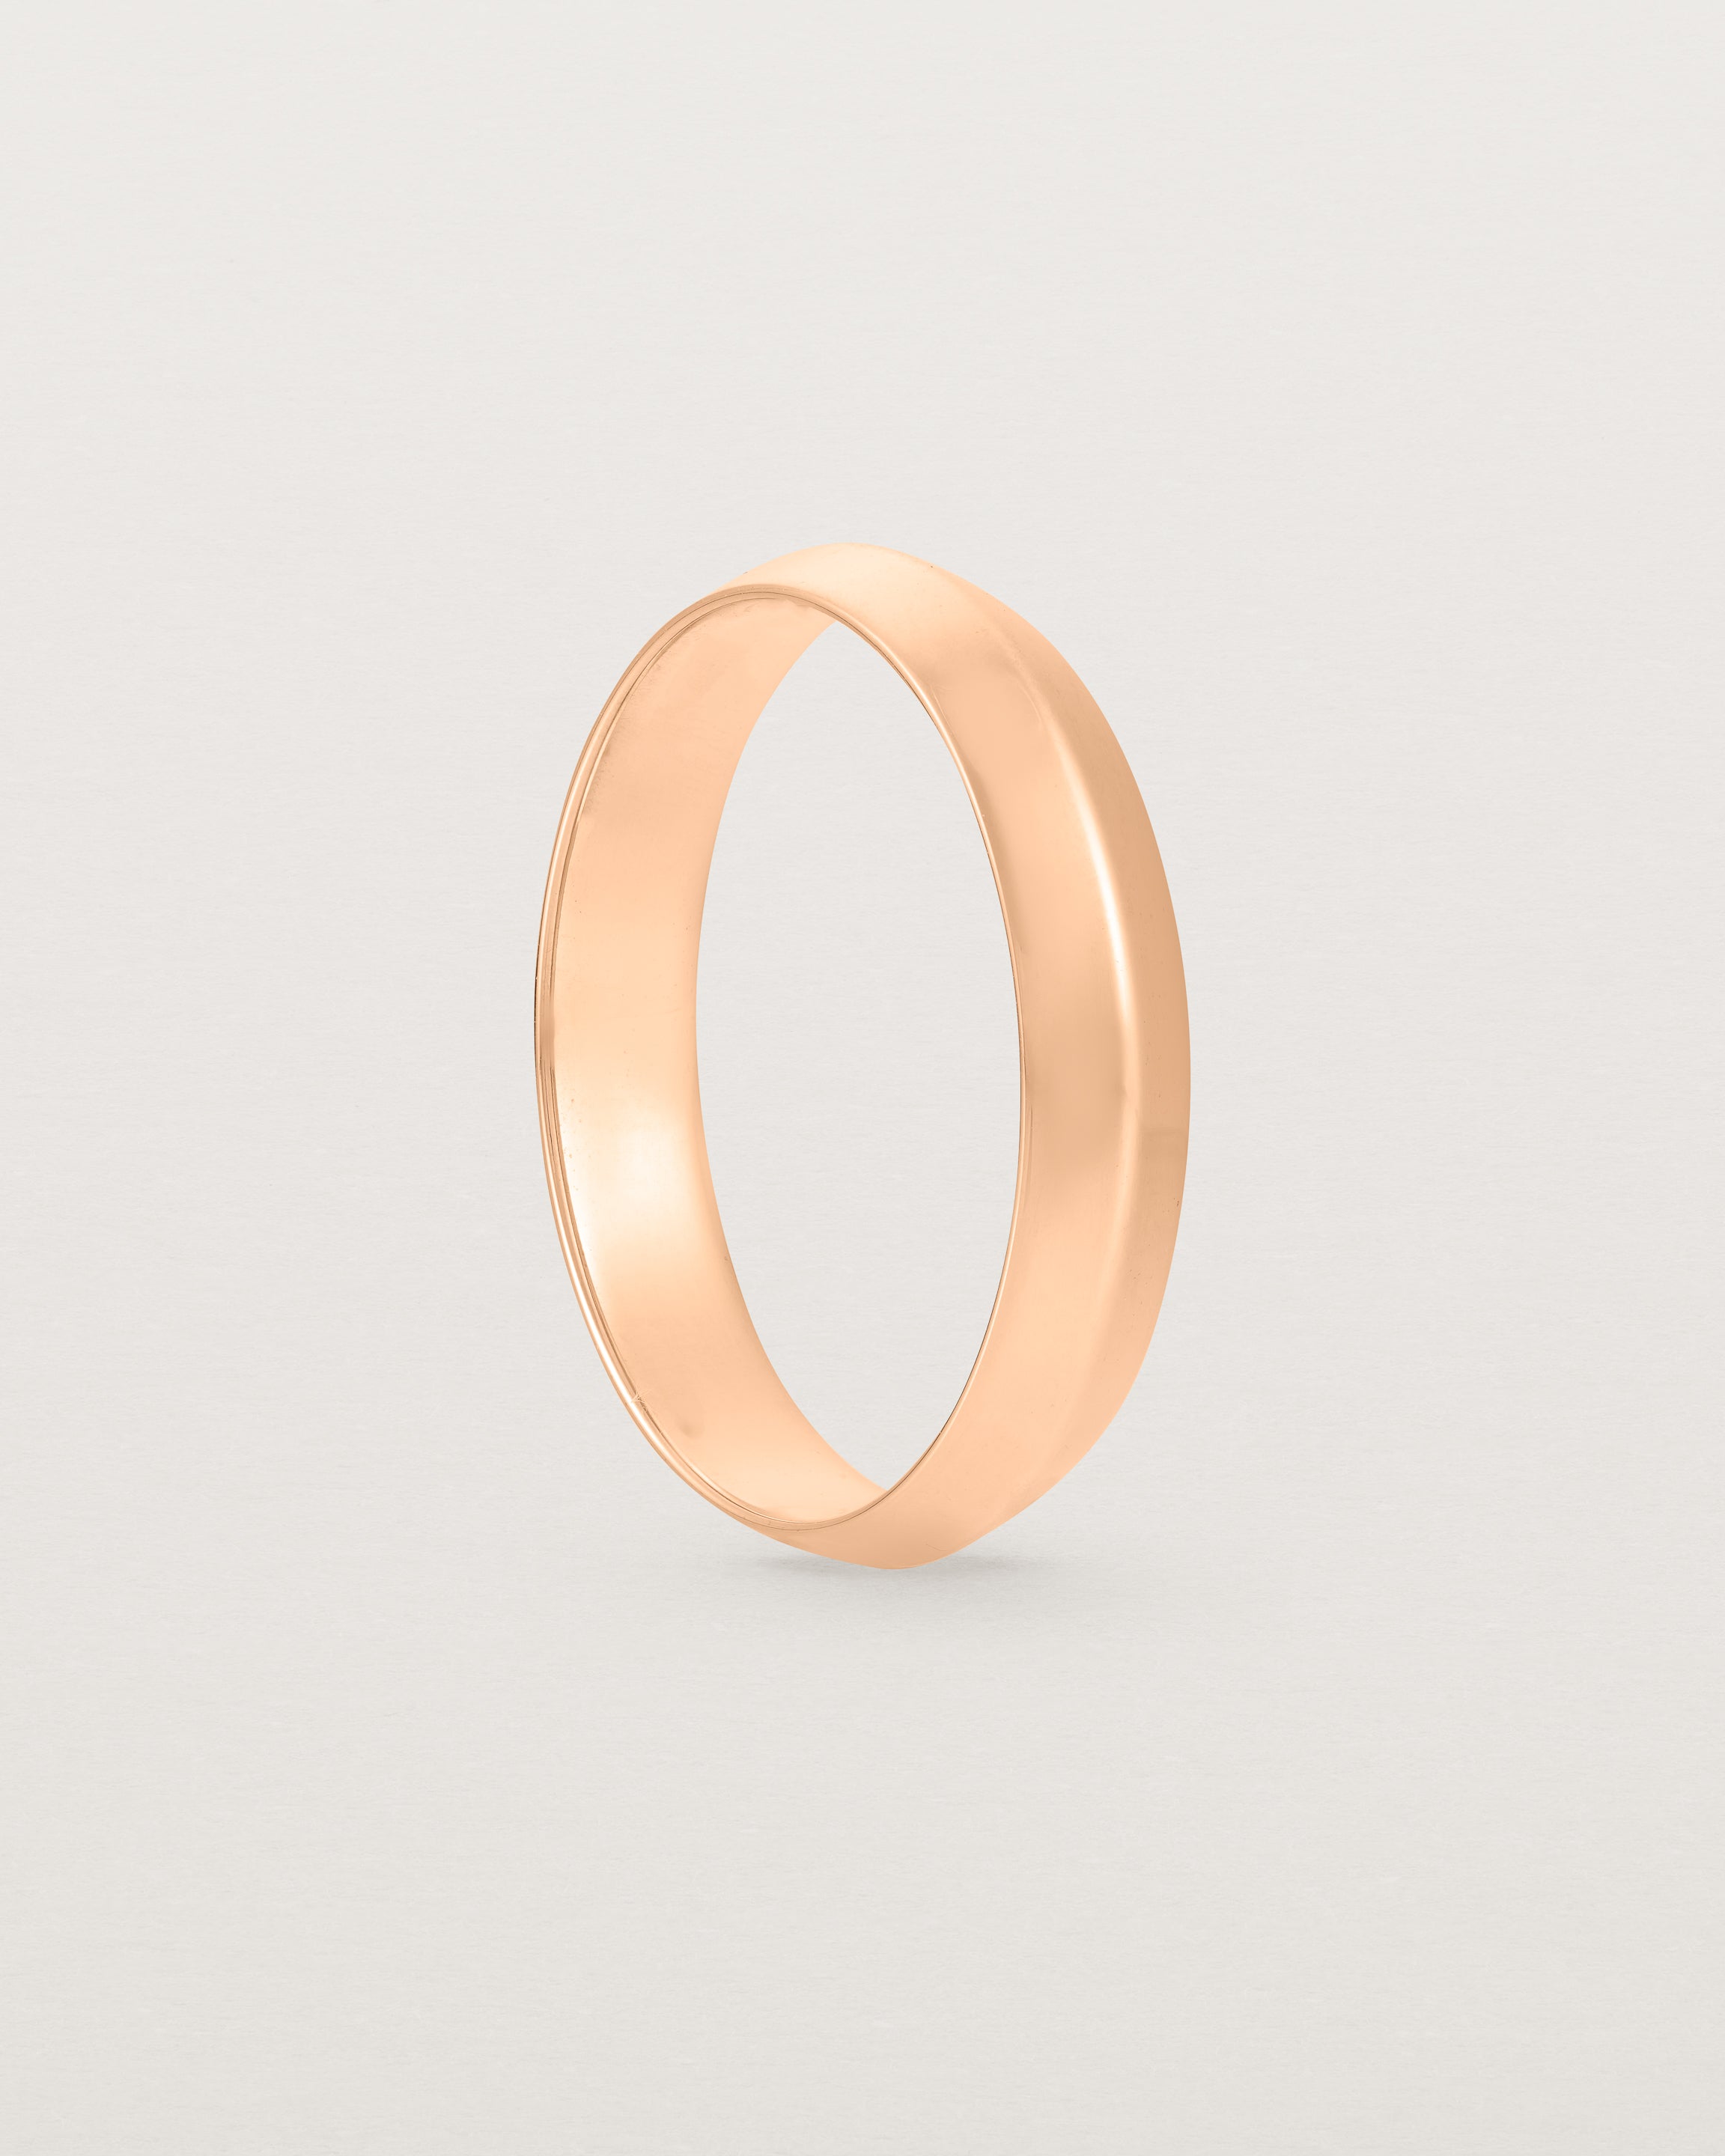 Standing view of the Knife Edge Wedding Ring | 4mm | Rose Gold.